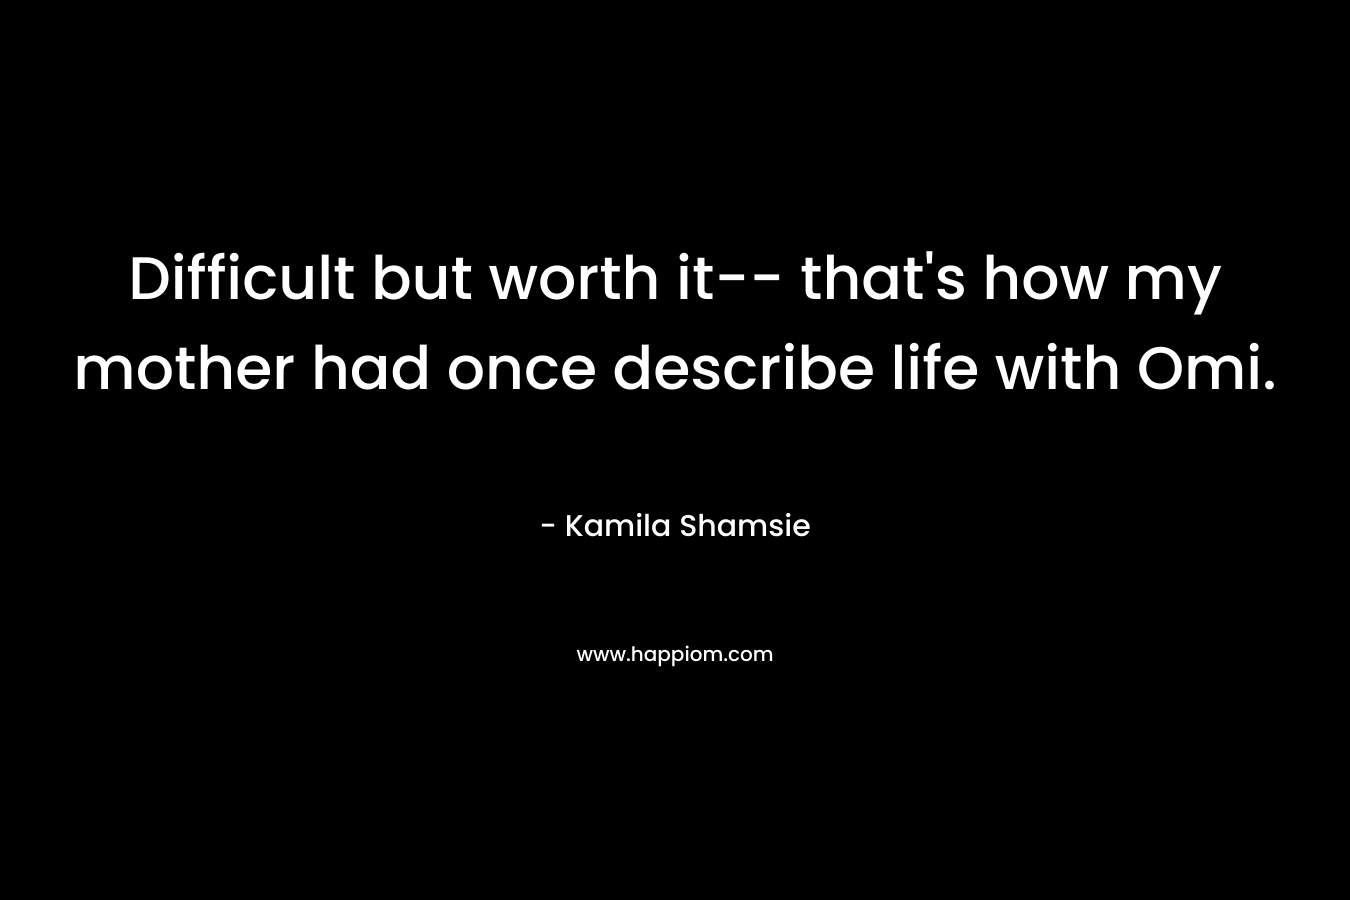 Difficult but worth it– that’s how my mother had once describe life with Omi. – Kamila Shamsie